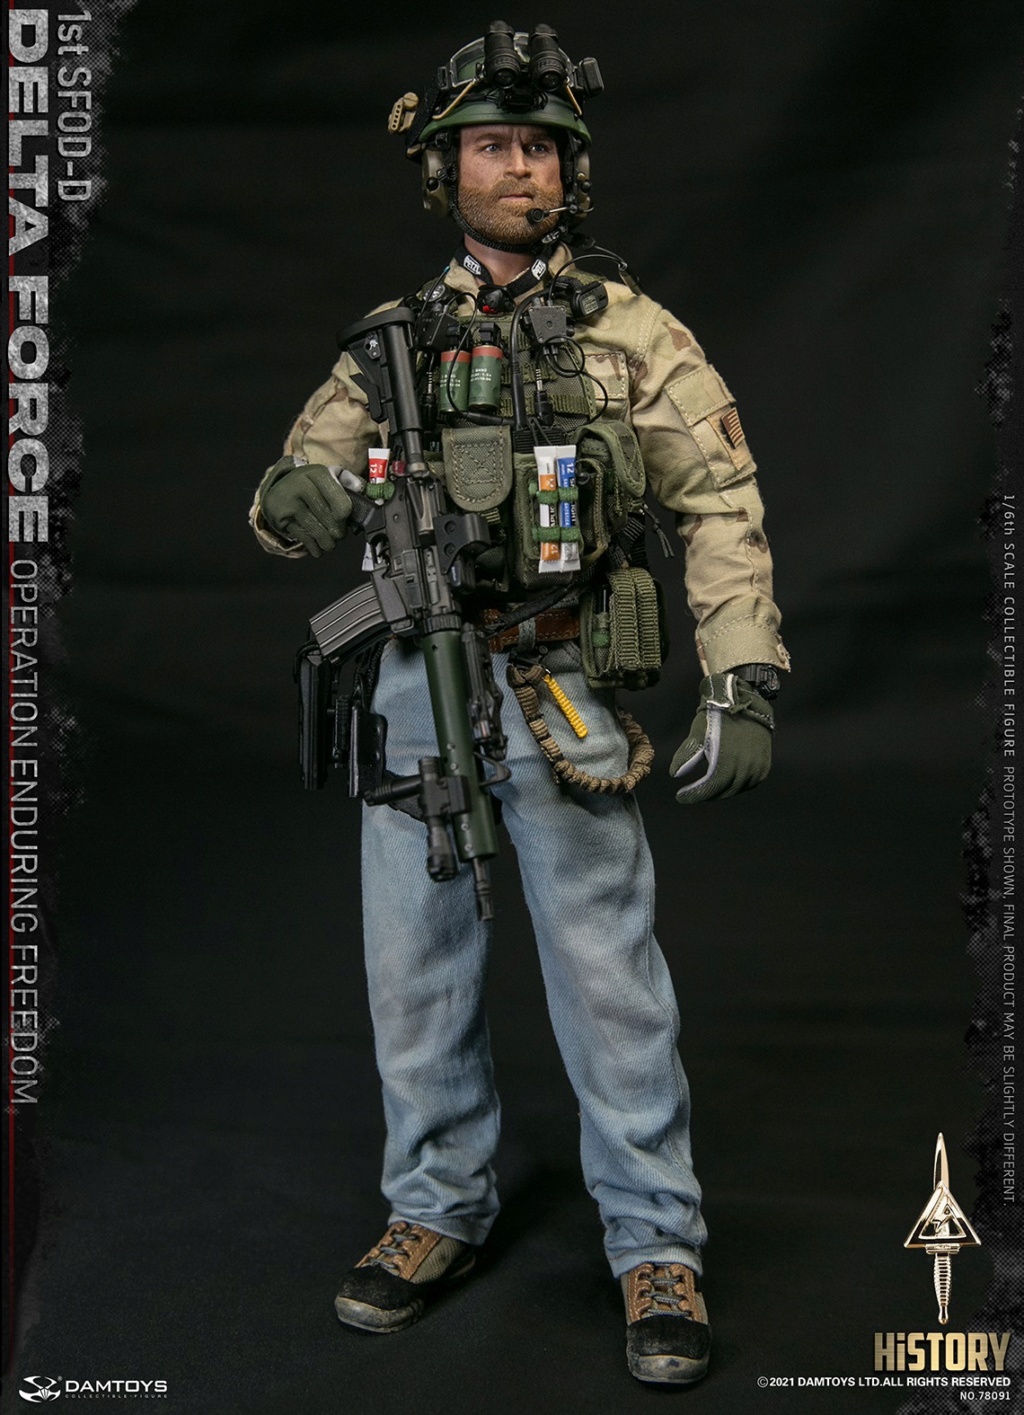 1stSFOD-D - NEW PRODUCT: DAMTOYS: 1/6 Delta Forces 1st SFOD-D Operation Enduring Freedom #78091 10520910